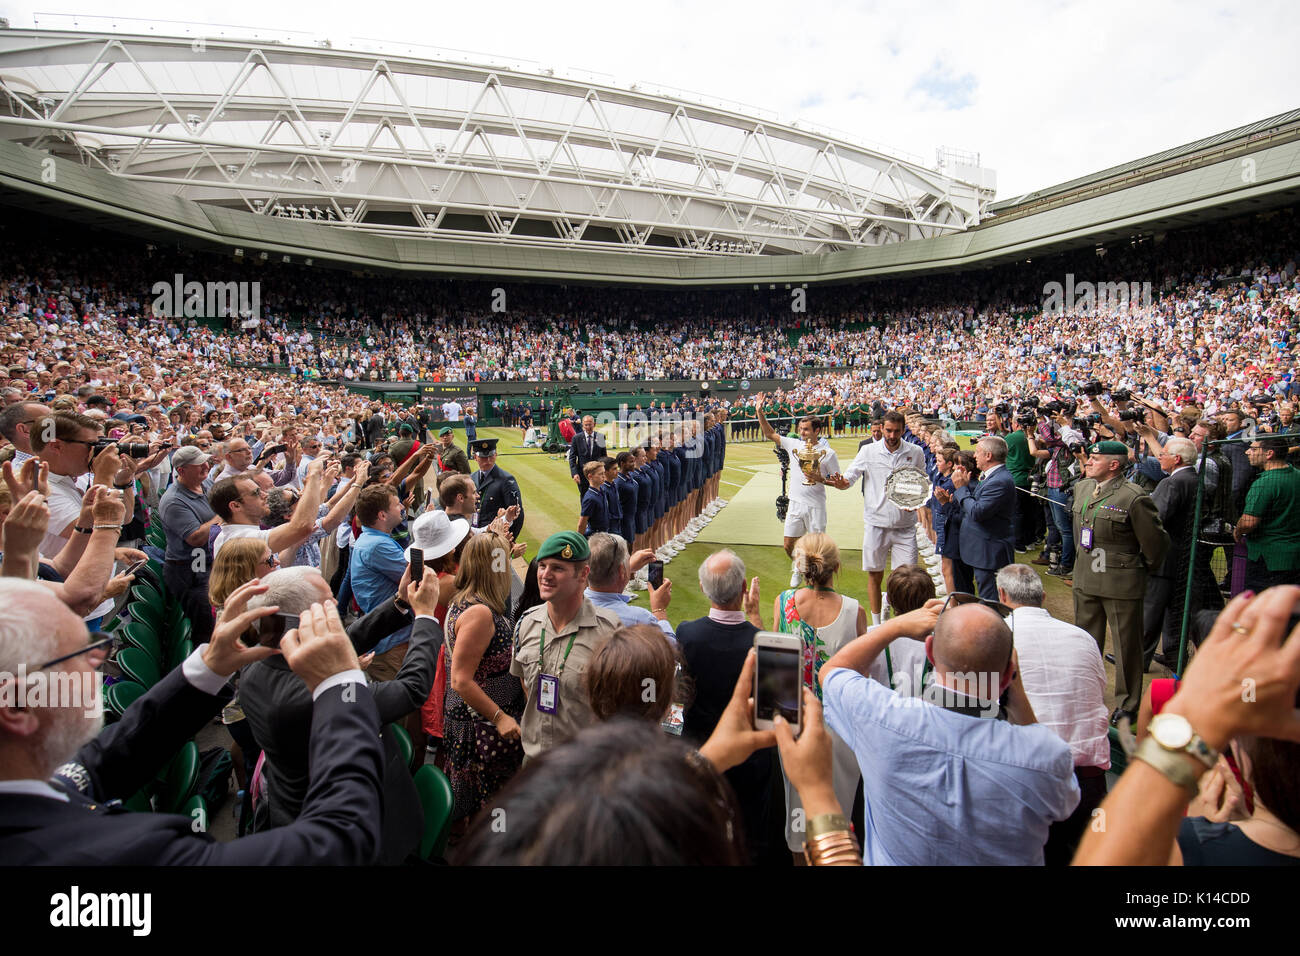 Roger Federer of Switzerland and Marin Cilic of Croatia walk off Centre Court with their trophies at the Gentlemen's Singles - Wimbledon Championships Stock Photo